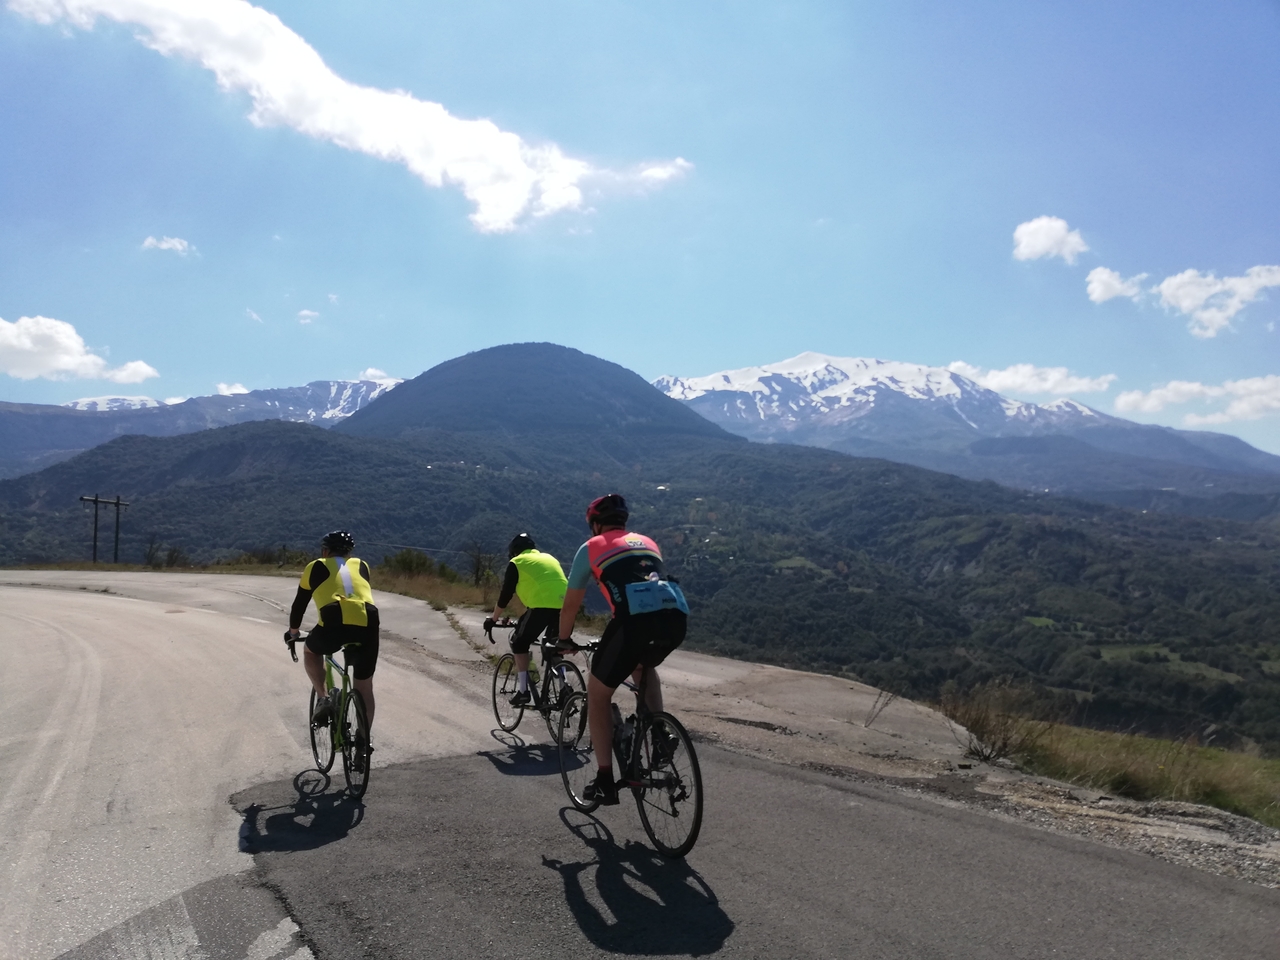 From Preveza to Thessaloniki via the edge of the Pindus Mountains and Mount Olympus. An exciting mix of Alpine-esque mountain roads, winding valley roads and sections along the Mediterranean coast, this ride has it all!